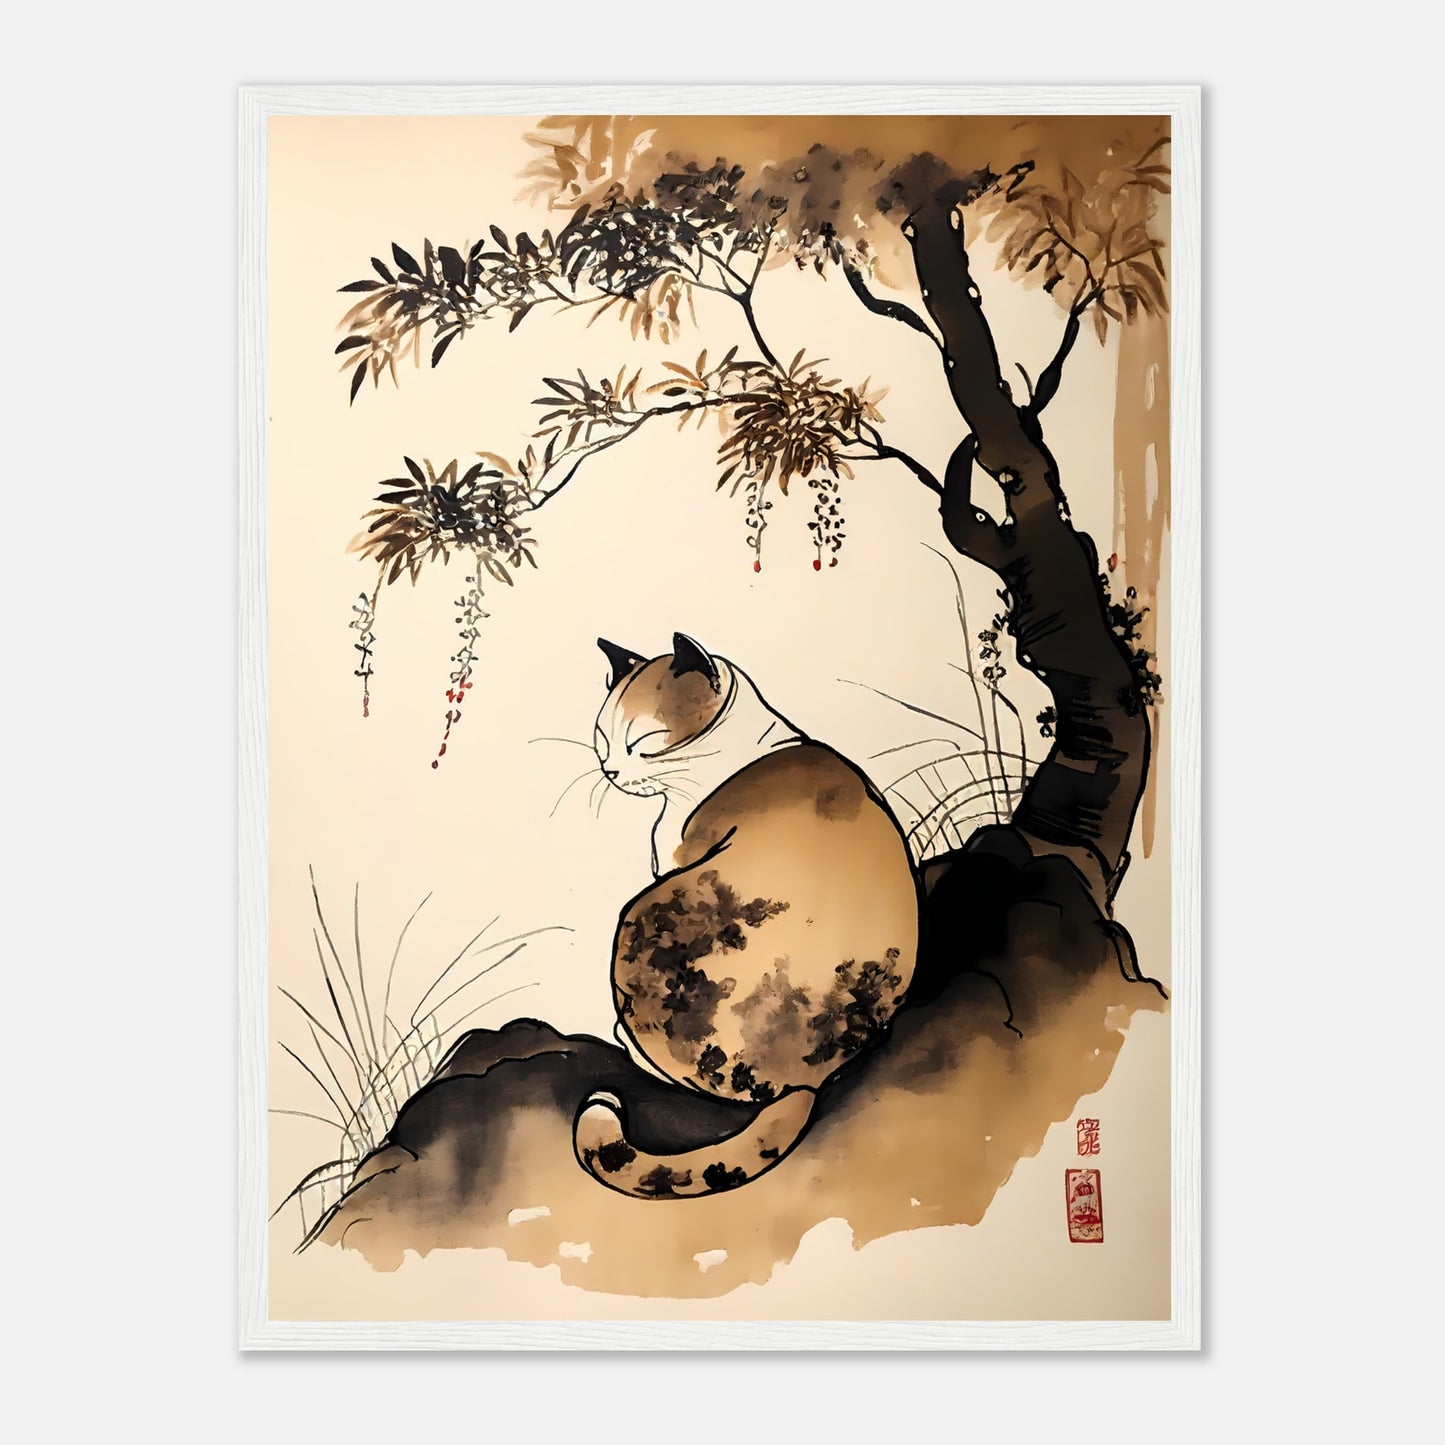 A traditional Asian-style painting of a cat under a tree with hanging foliage.